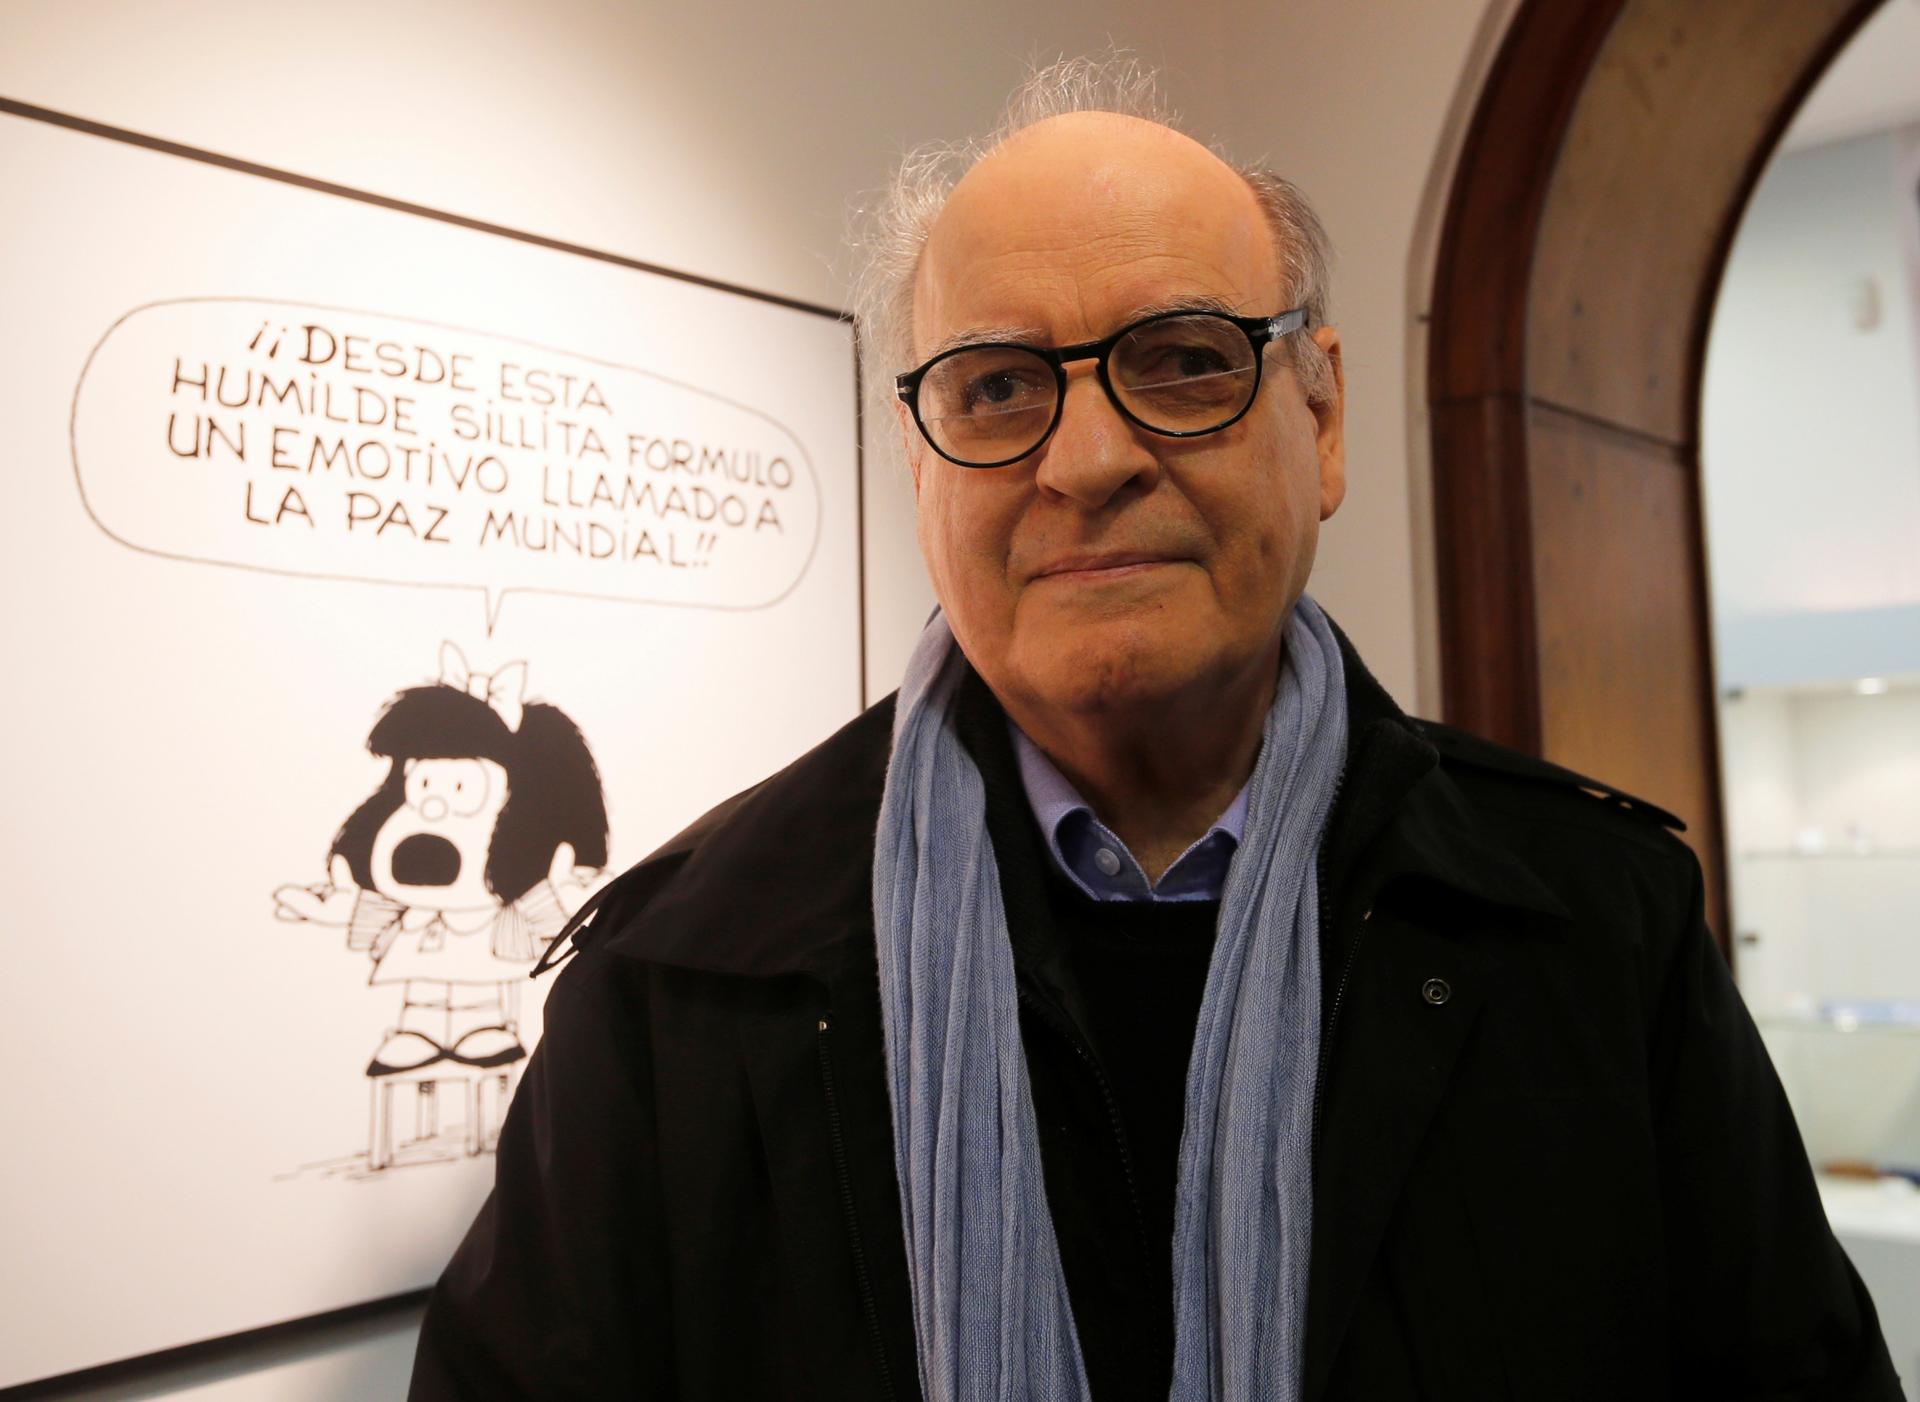 Argentine cartoonist Joaquín Salvador Lavado, also known by his pen name Quino, poses in front of an image of his most famous comic character Mafalda during the opening ceremony of the exhibition of his works at the Museo del Humor in Buenos Aires, June 1